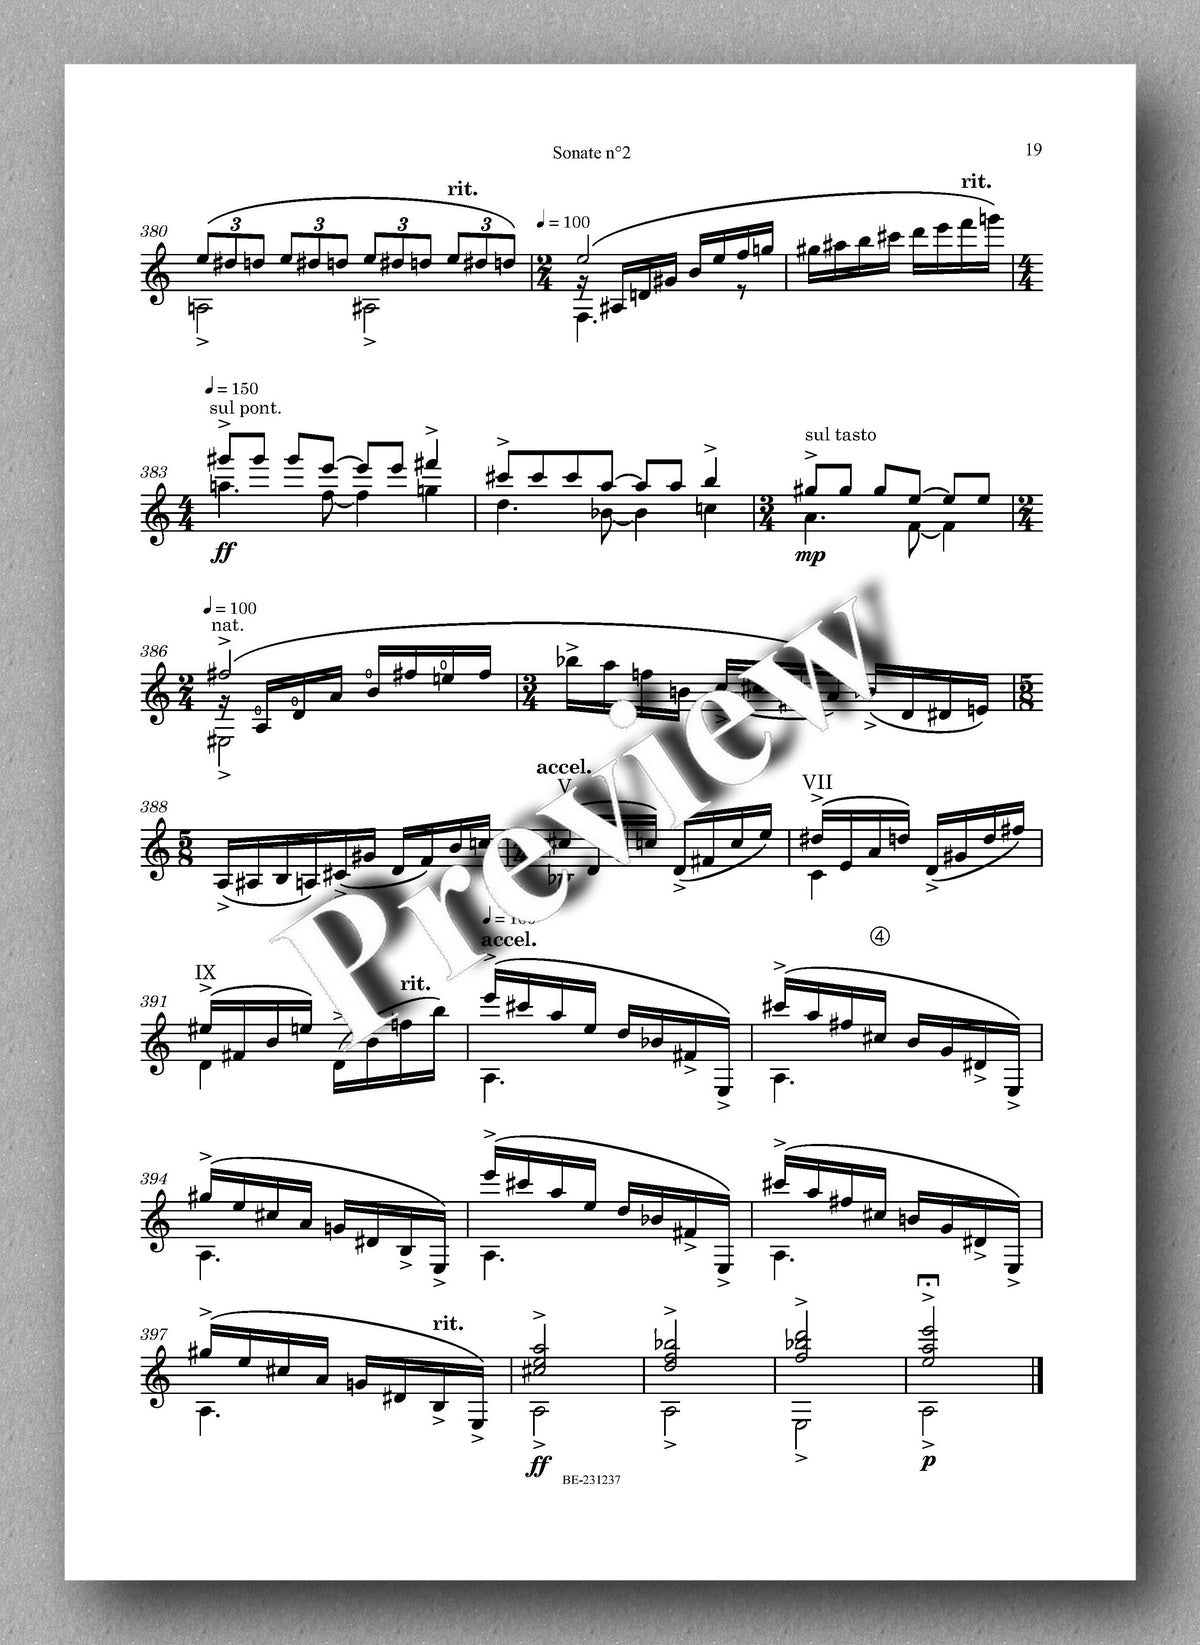 Sonate n°2 by Christian Vasseur - preview of the music score 4